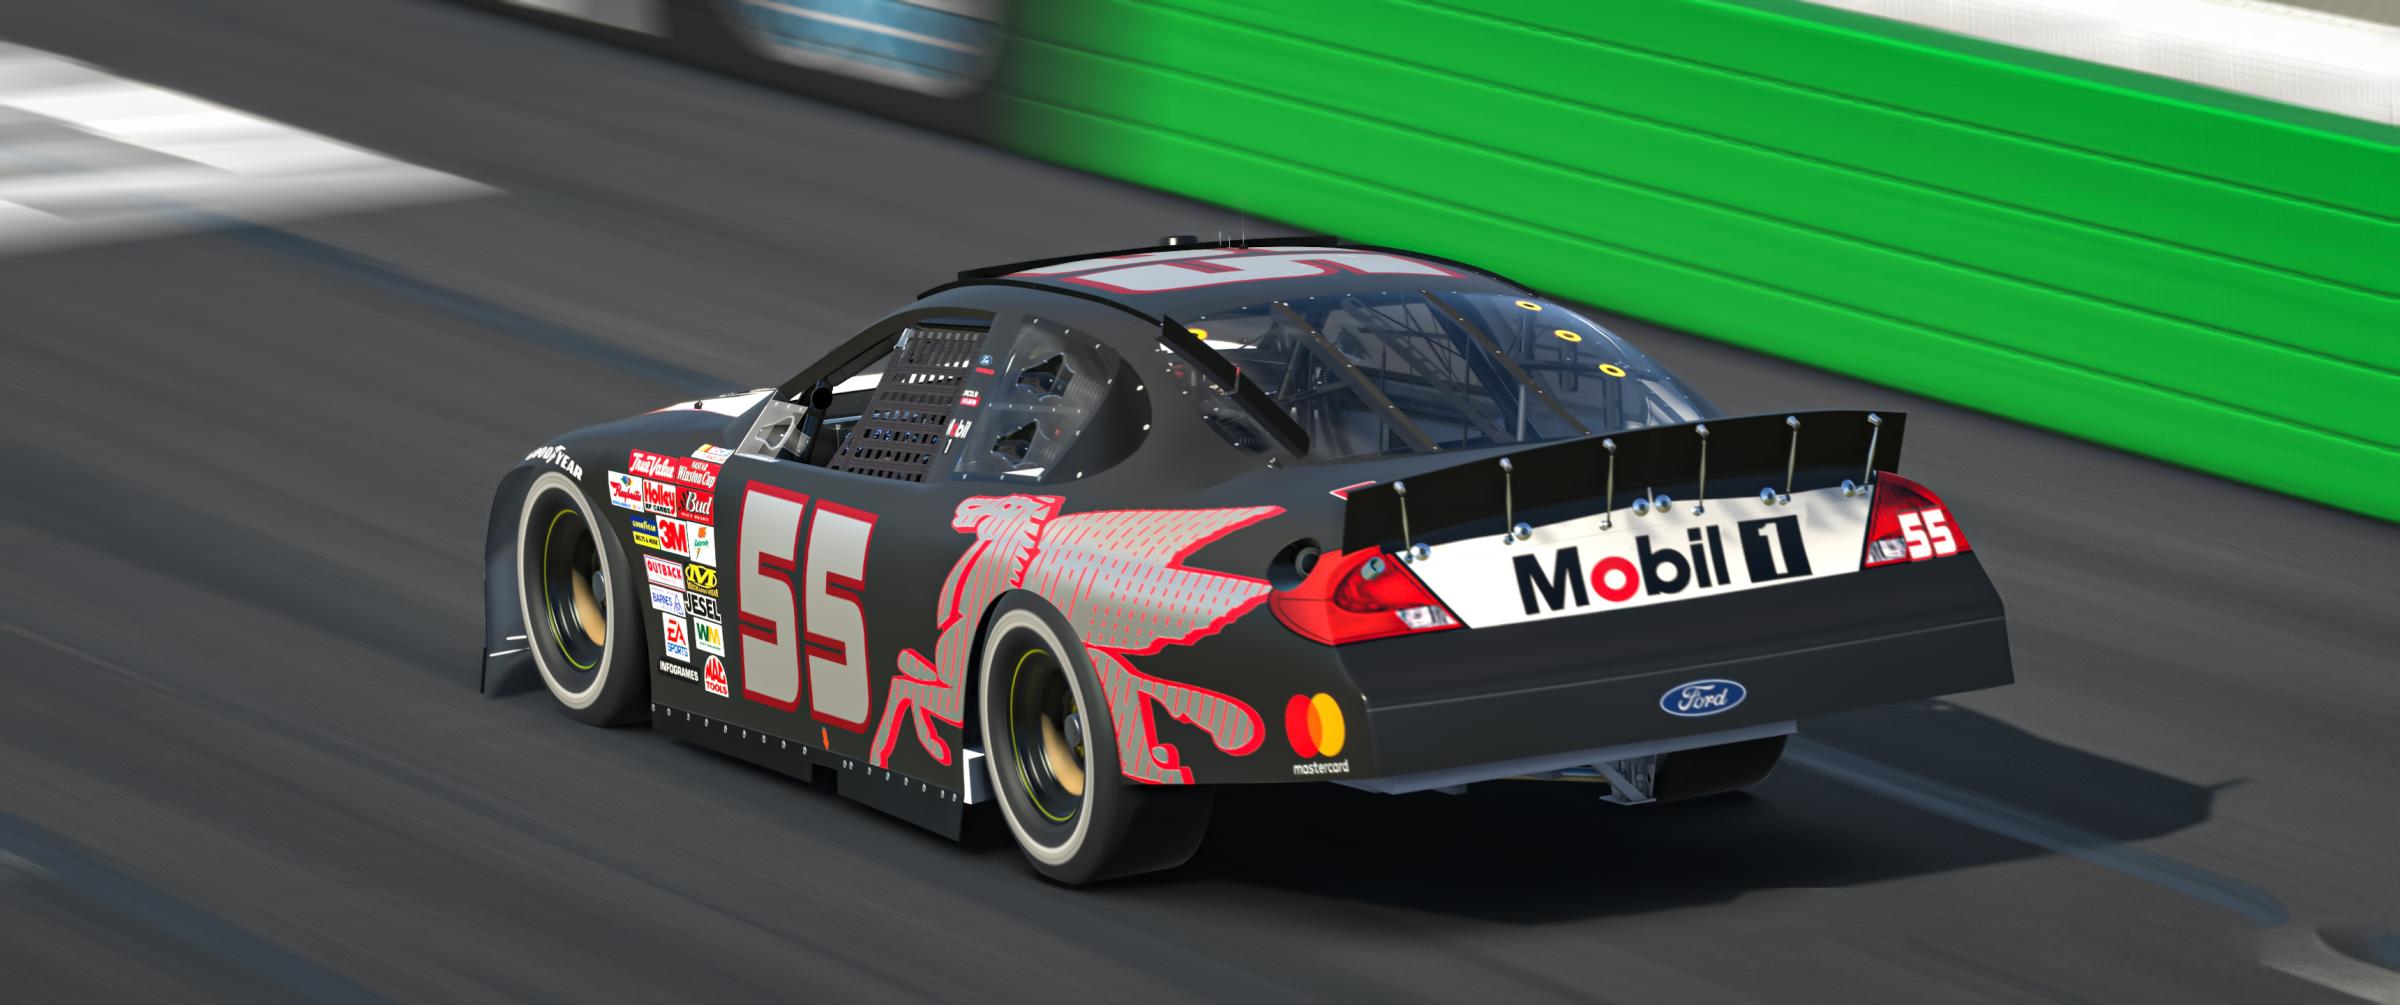 Preview of Early 2000s Mobil 1 Ford Taurus Nostalgia Fantasy Livery by Daniel Kranefuss